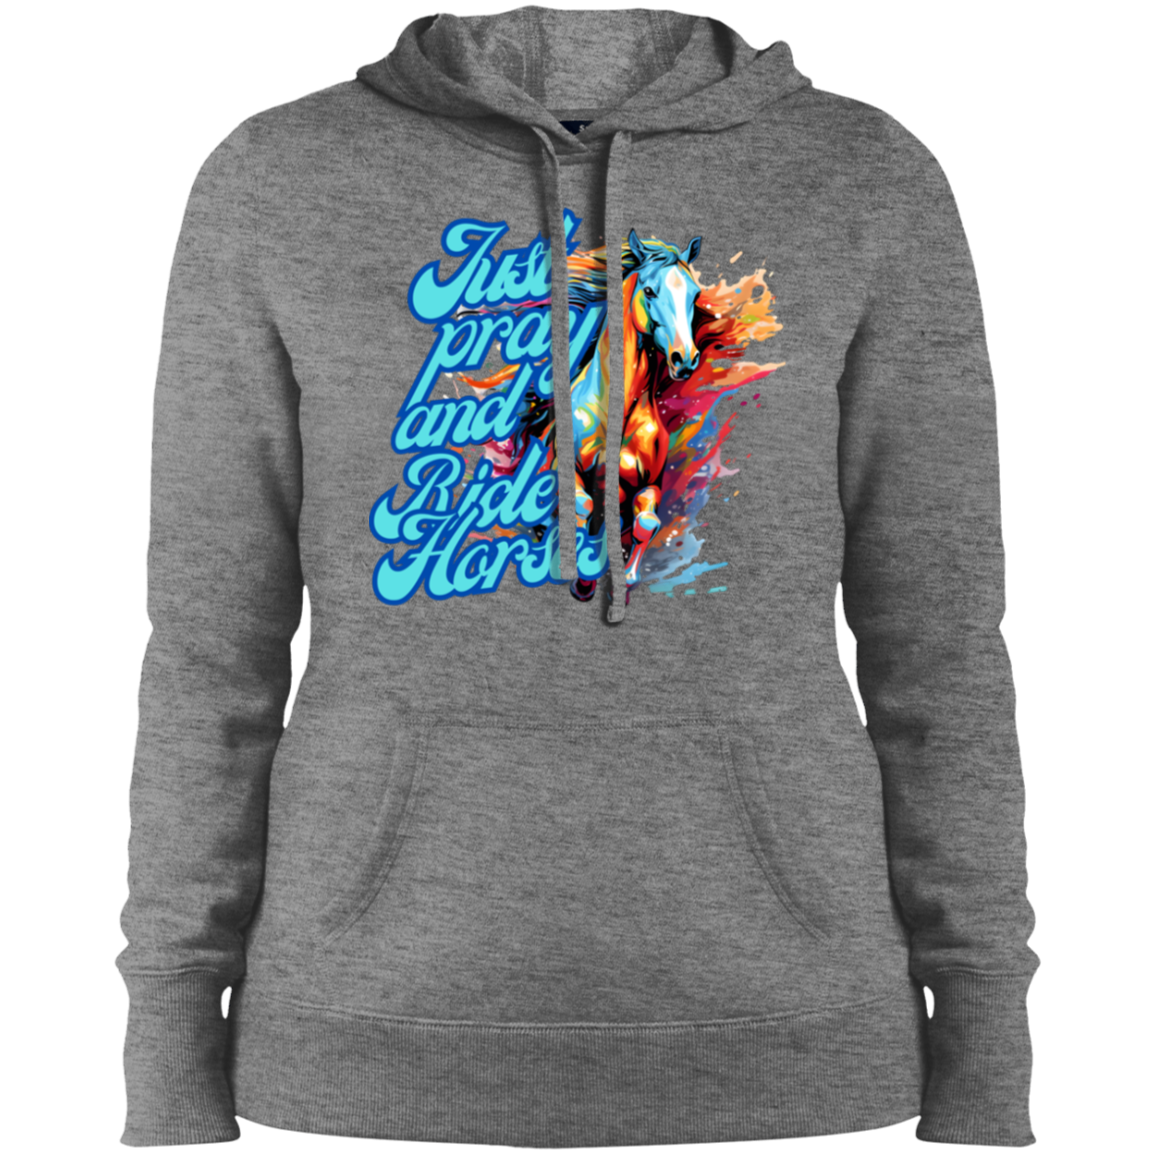 Just Pray and Ride Horses Hoodie For Horse Lovers